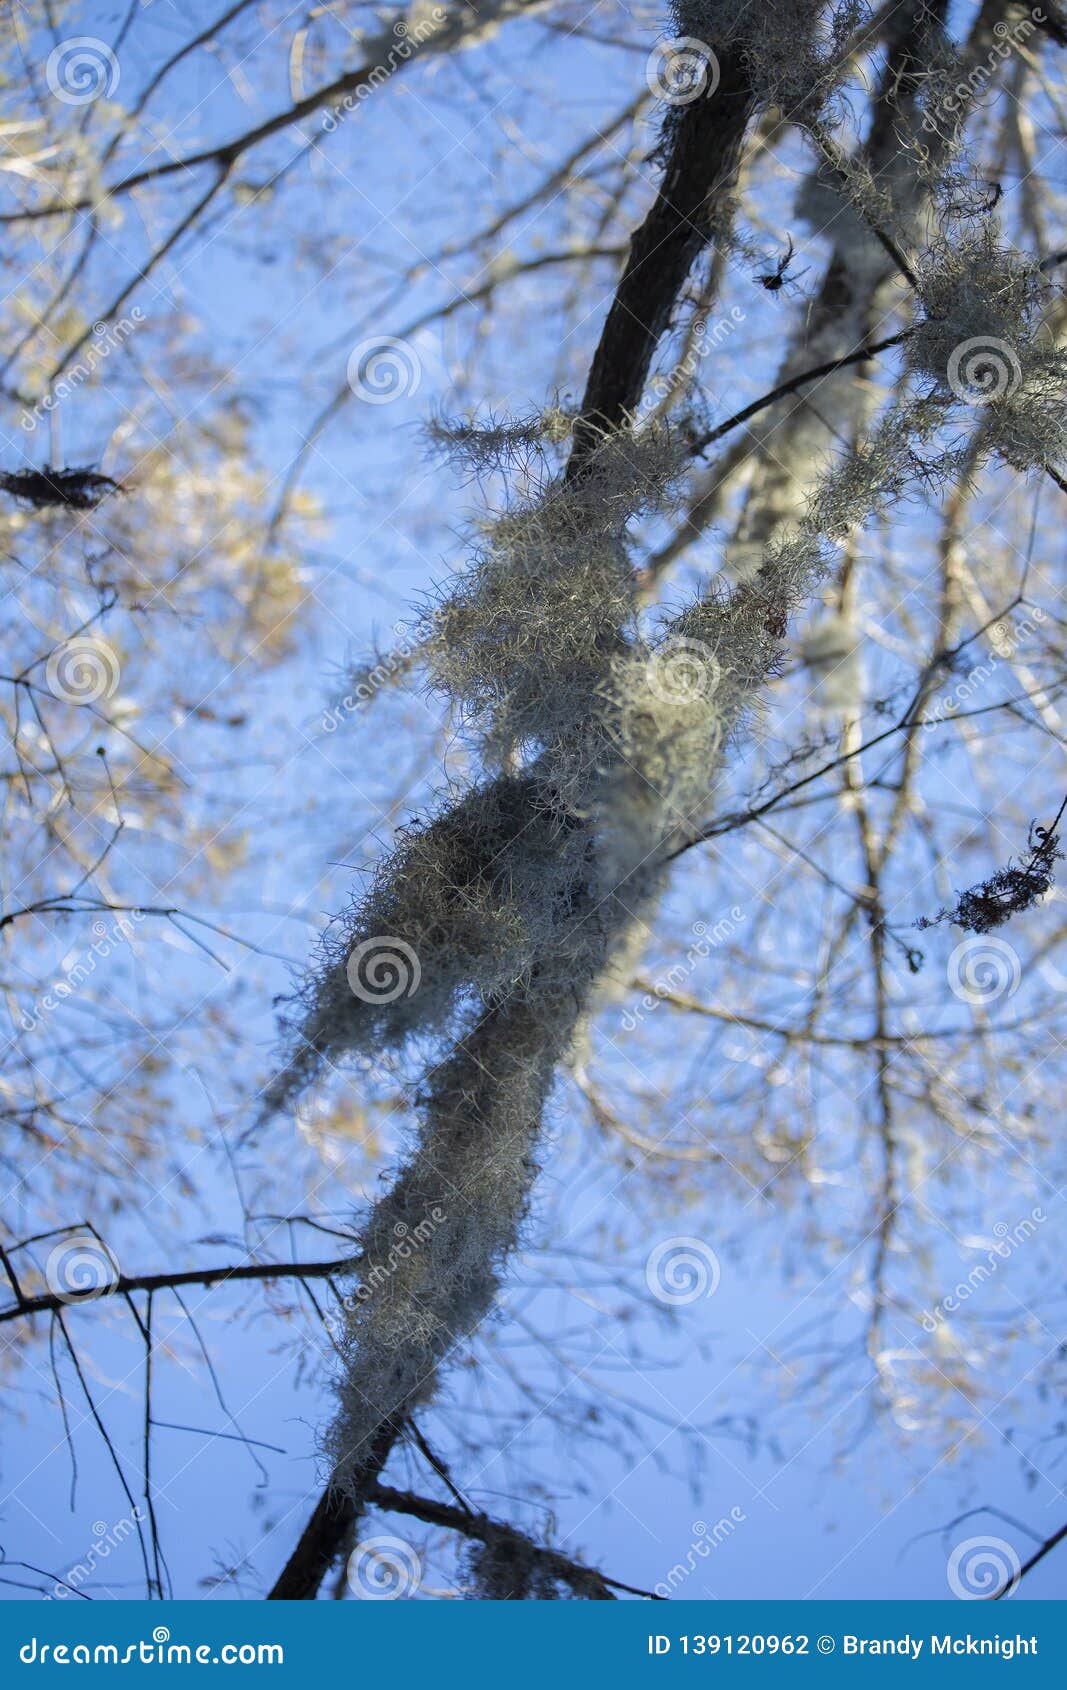 Spanish Moss Hanging From Tree Stock Photo - Image of ...